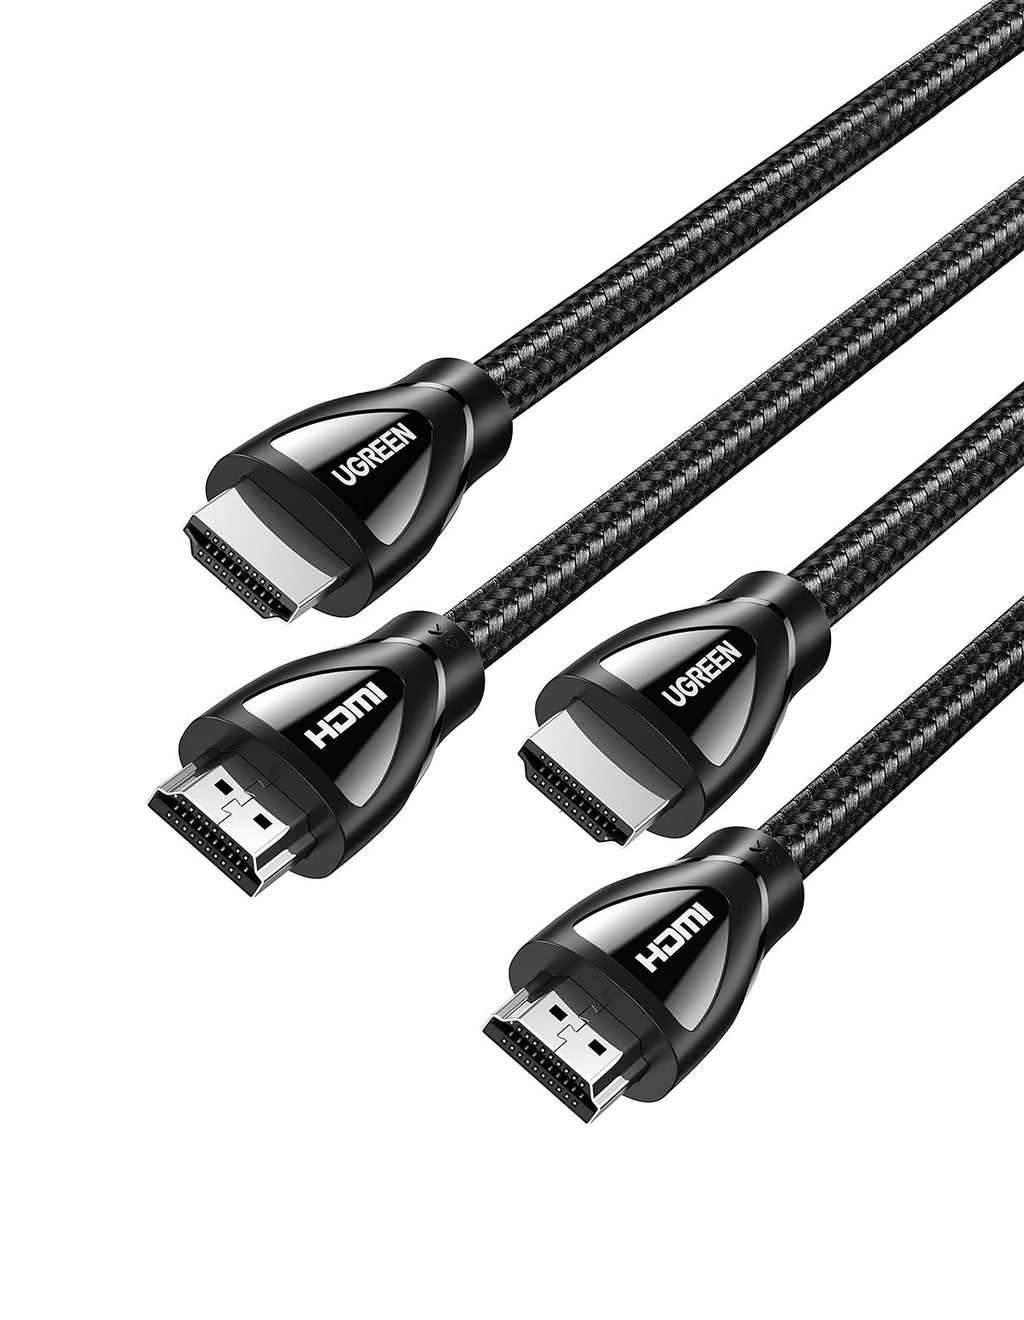 UGREEN 2 Pack 8K HDMI 2.1 Cable, 3.3FT 48Gbps High Speed Braided HDMI Cord 8K 60Hz 4K 120Hz eARC HDR HDCP 2.2 2.3 Compatible with PS5 PS4 Xbox UHD Roku TV Blu-ray Projector